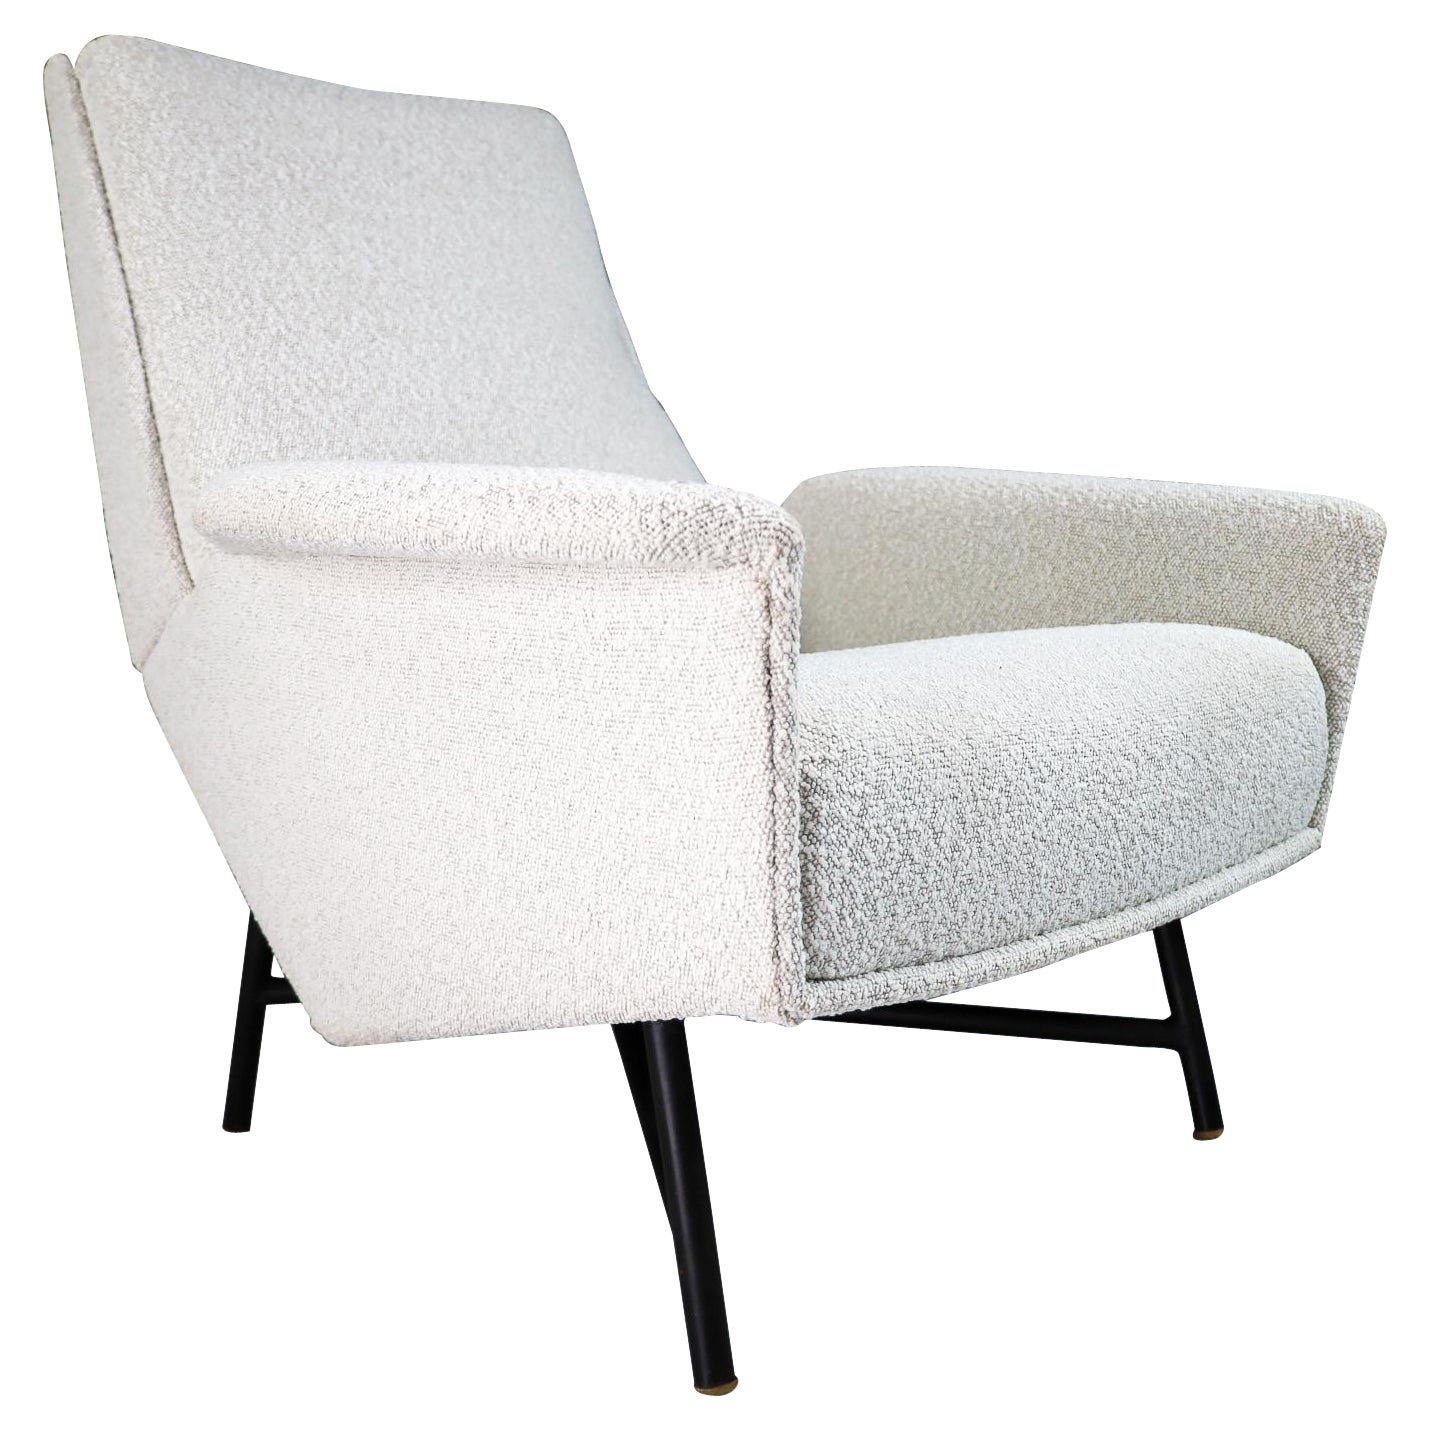 Midcentury Modern Lounge Chair in Re Upholstered Boucle Wool by Guy Besnard 1959 For Sale